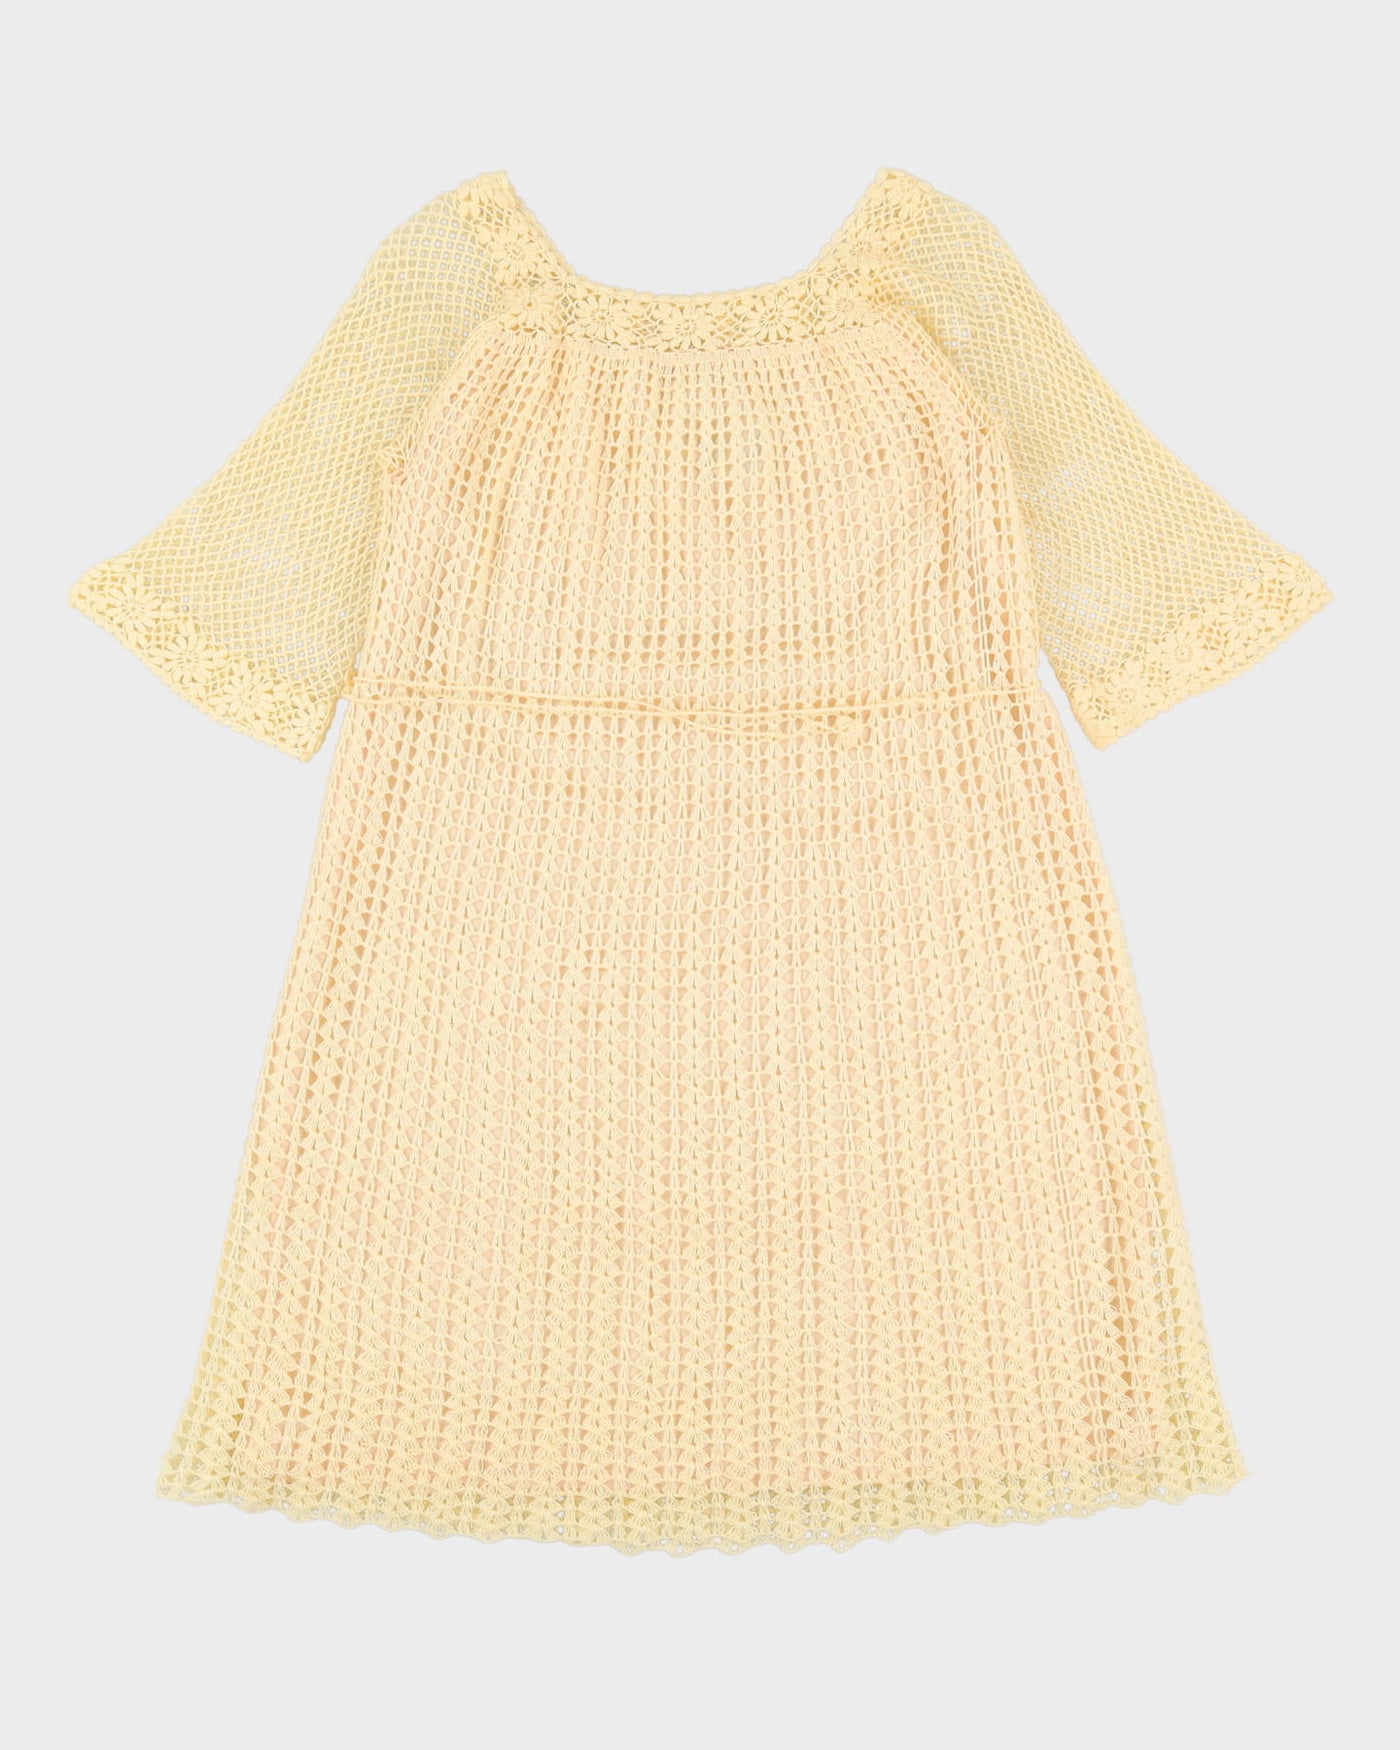 1970s style crocheted dress - S